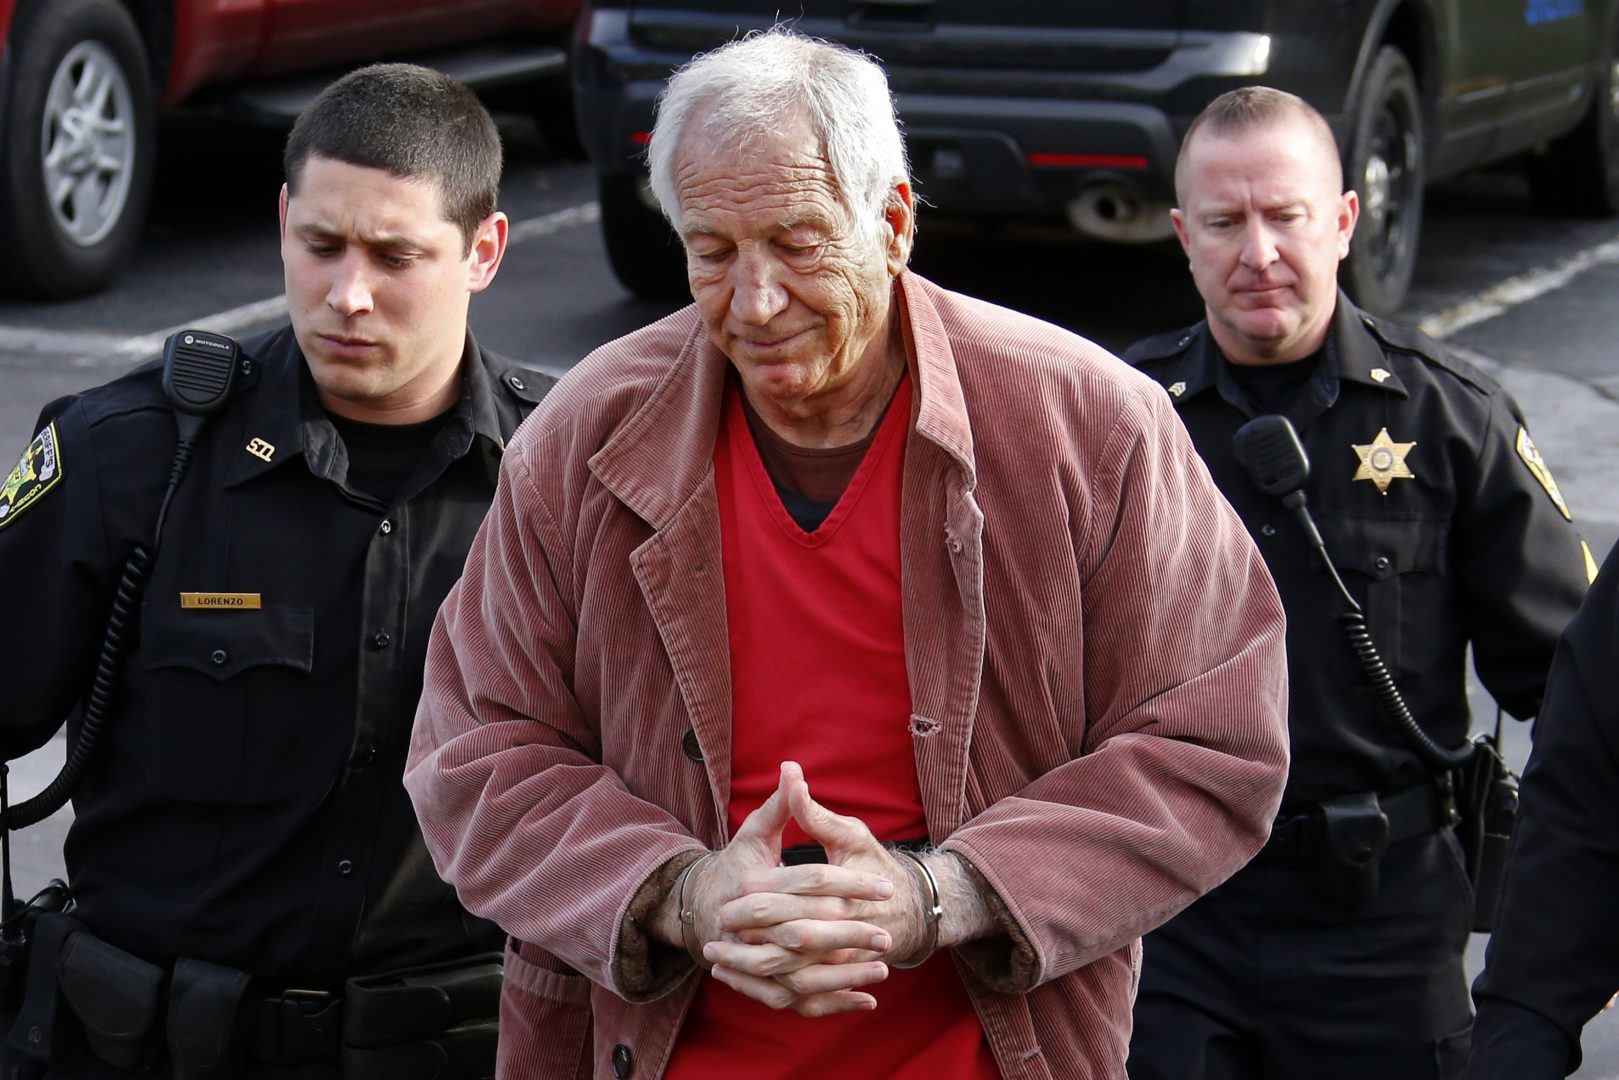 FILE PHOTO: In this Oct. 29, 2015 file photo, former Penn State University assistant football coach Jerry Sandusky, center, arrives at the Centre County Courthouse for a hearing about his appeal on his child sex-abuse conviction, in Bellefonte, Pa.